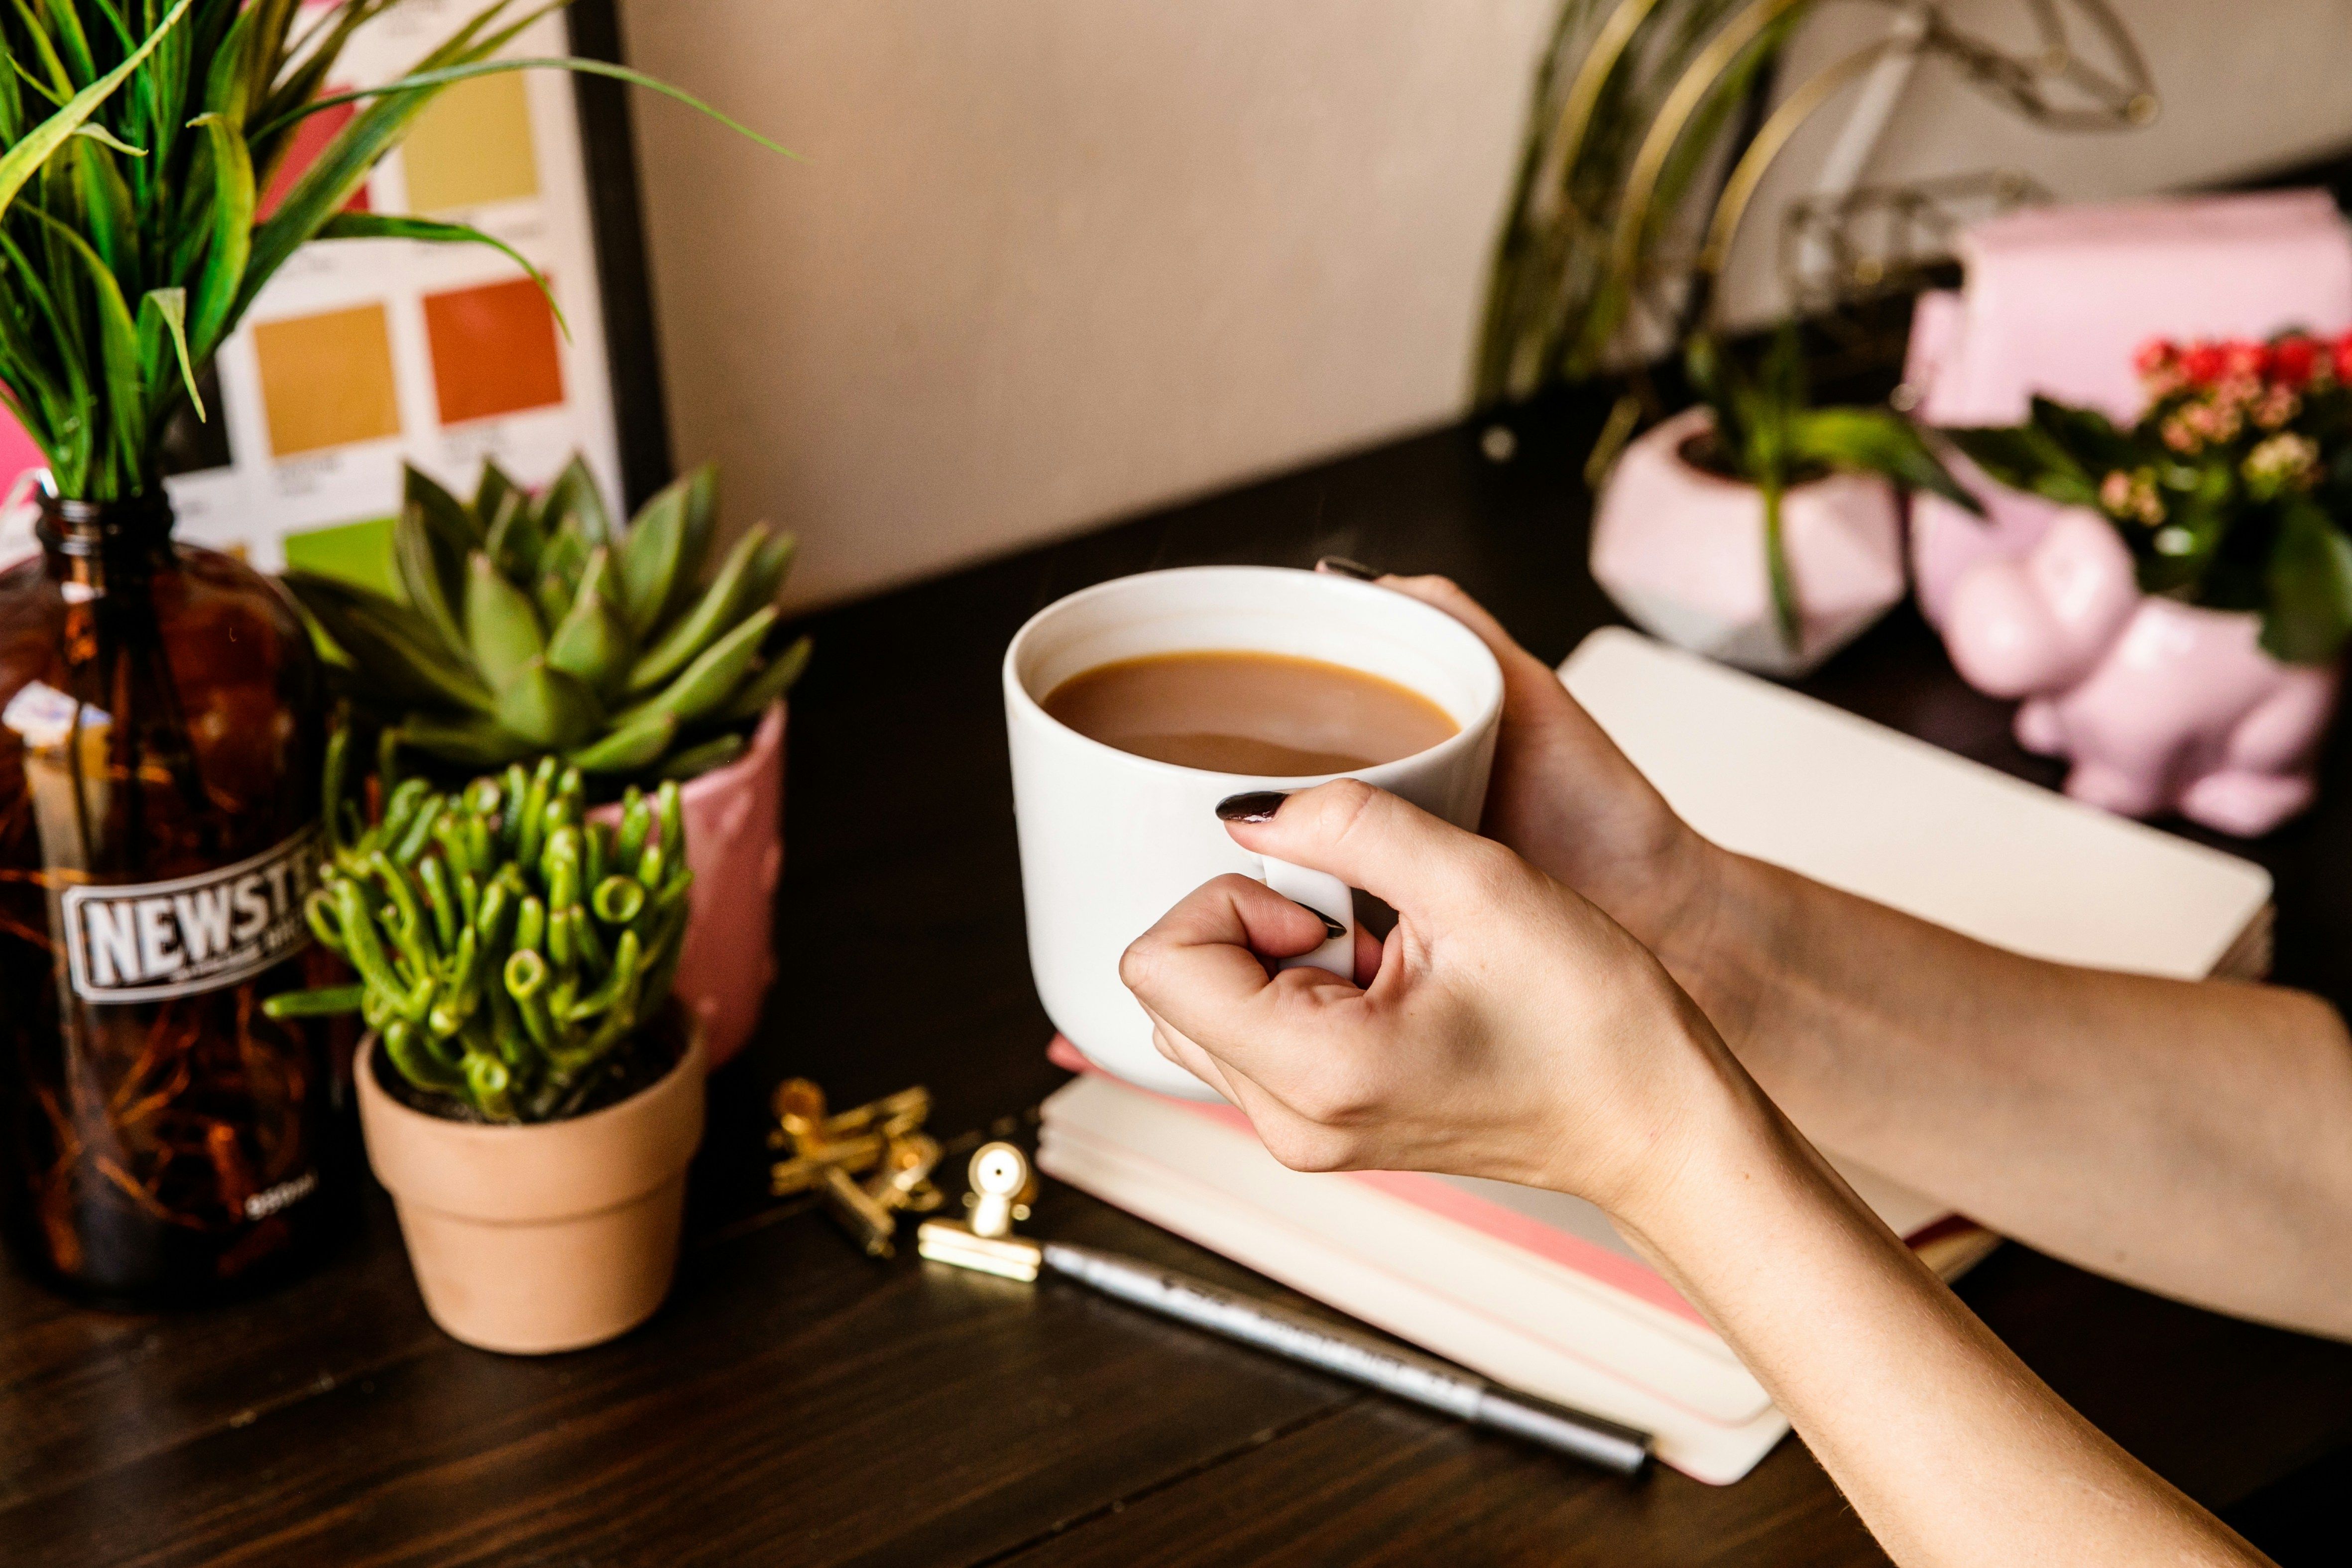 A desk decorated with numerous small succulents in terracotta and pink planters, with two hands leaning over, clutching a filled coffee cup over an open notebook.